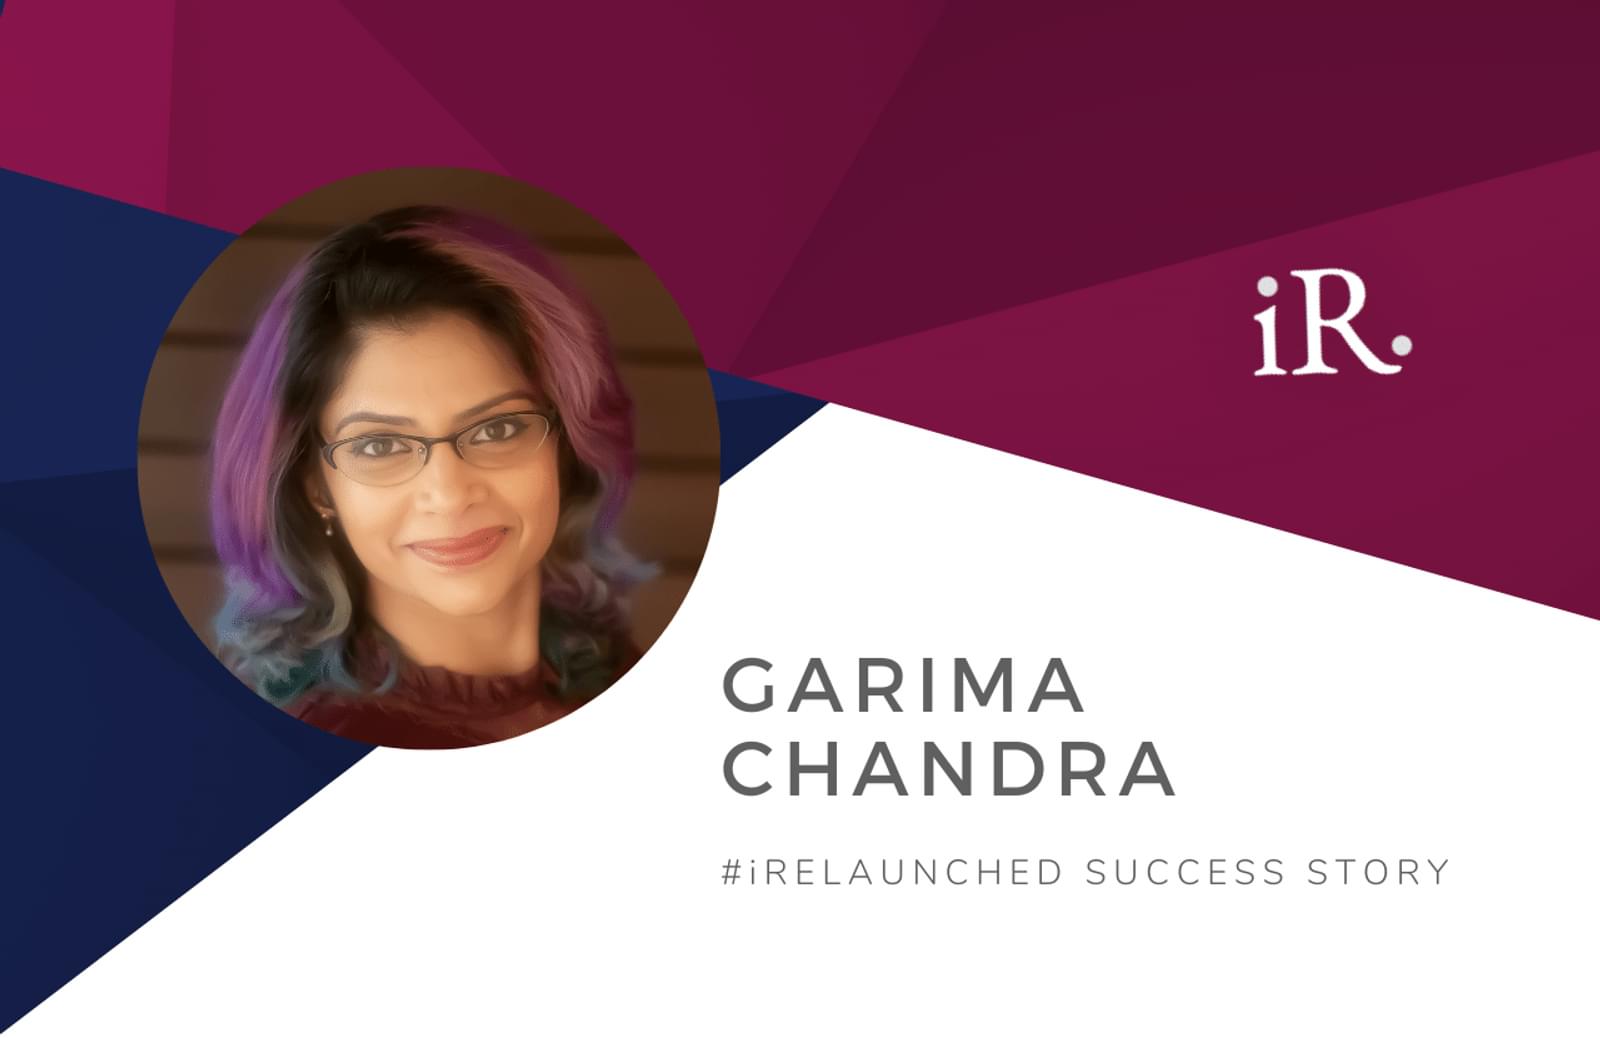 Garima Chandra's headshot and the text #iRelaunched Success Story along with the iRelaunch logo.  A navy and maroon geometric textured background intersect behind Garima's headshot.